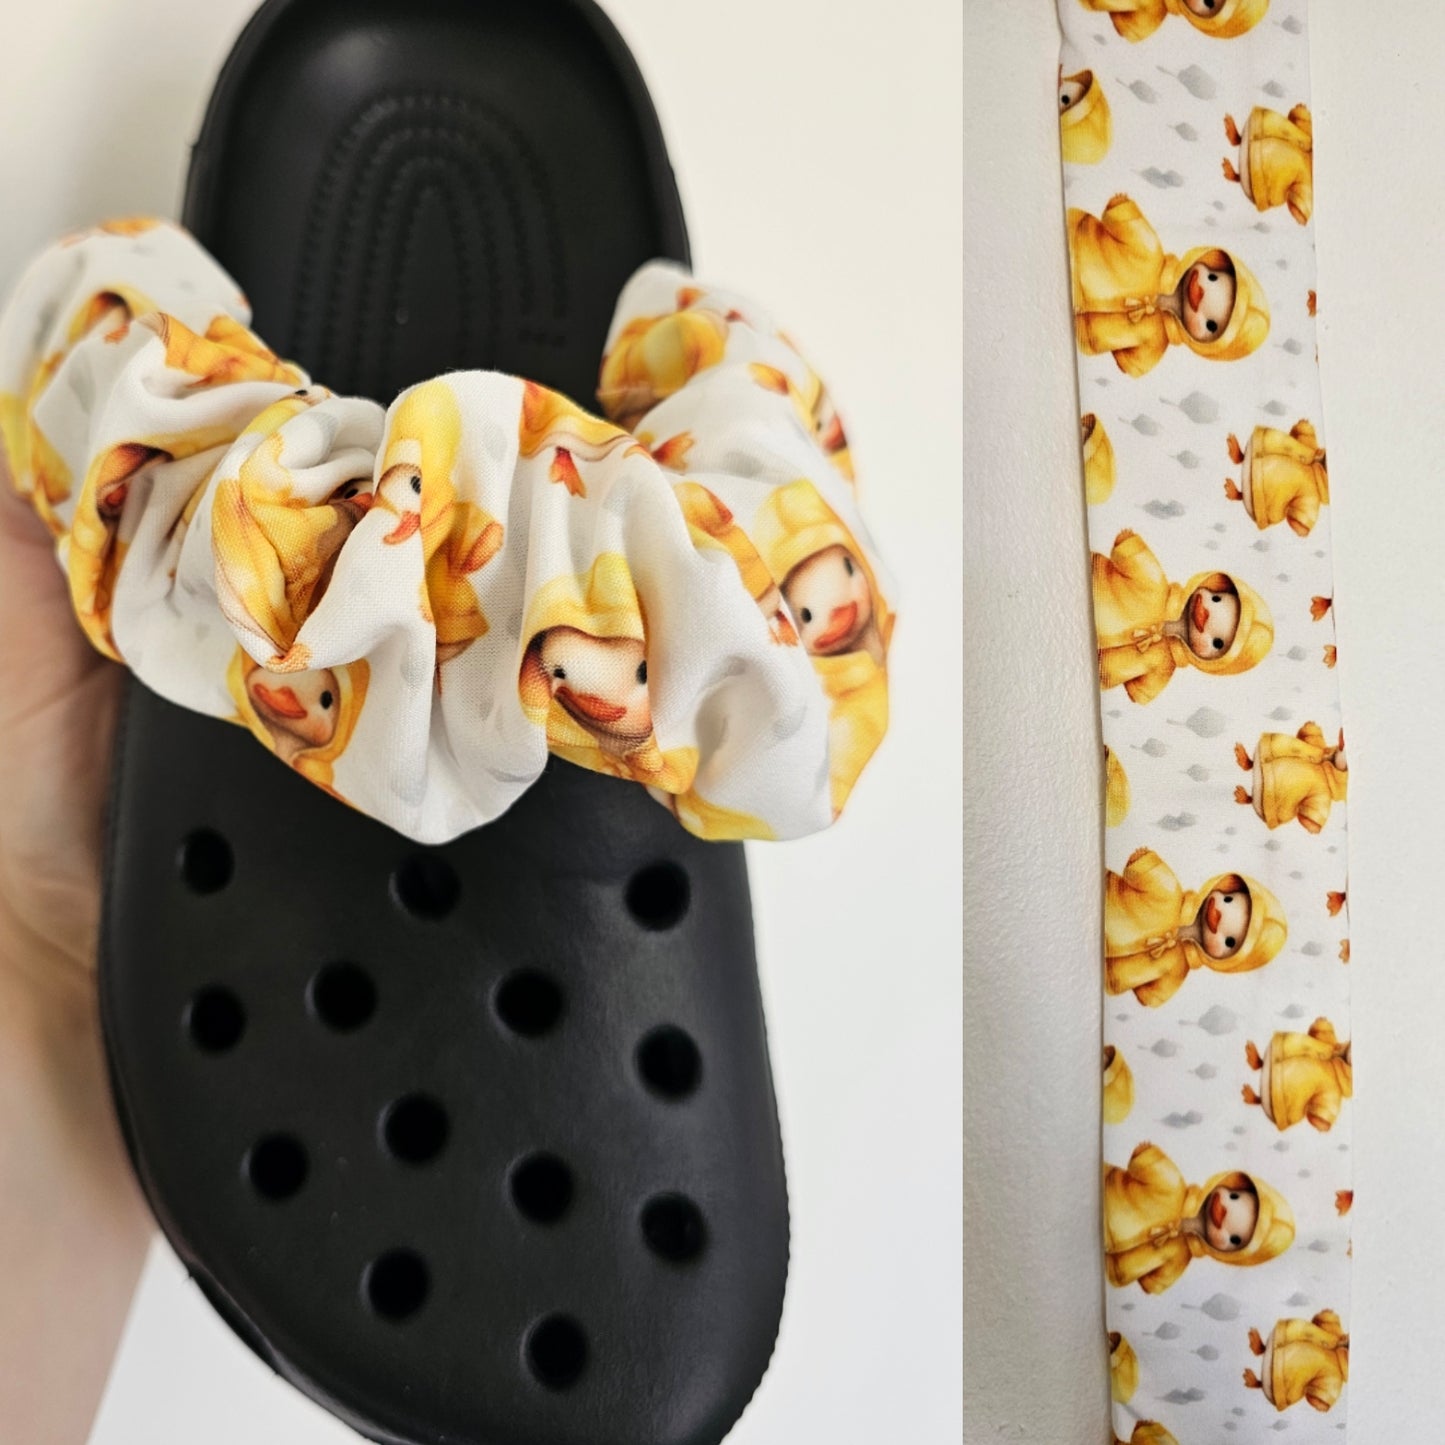 Childrens, animal and dinosaur print shoe strap covers- COME AS A PAIR